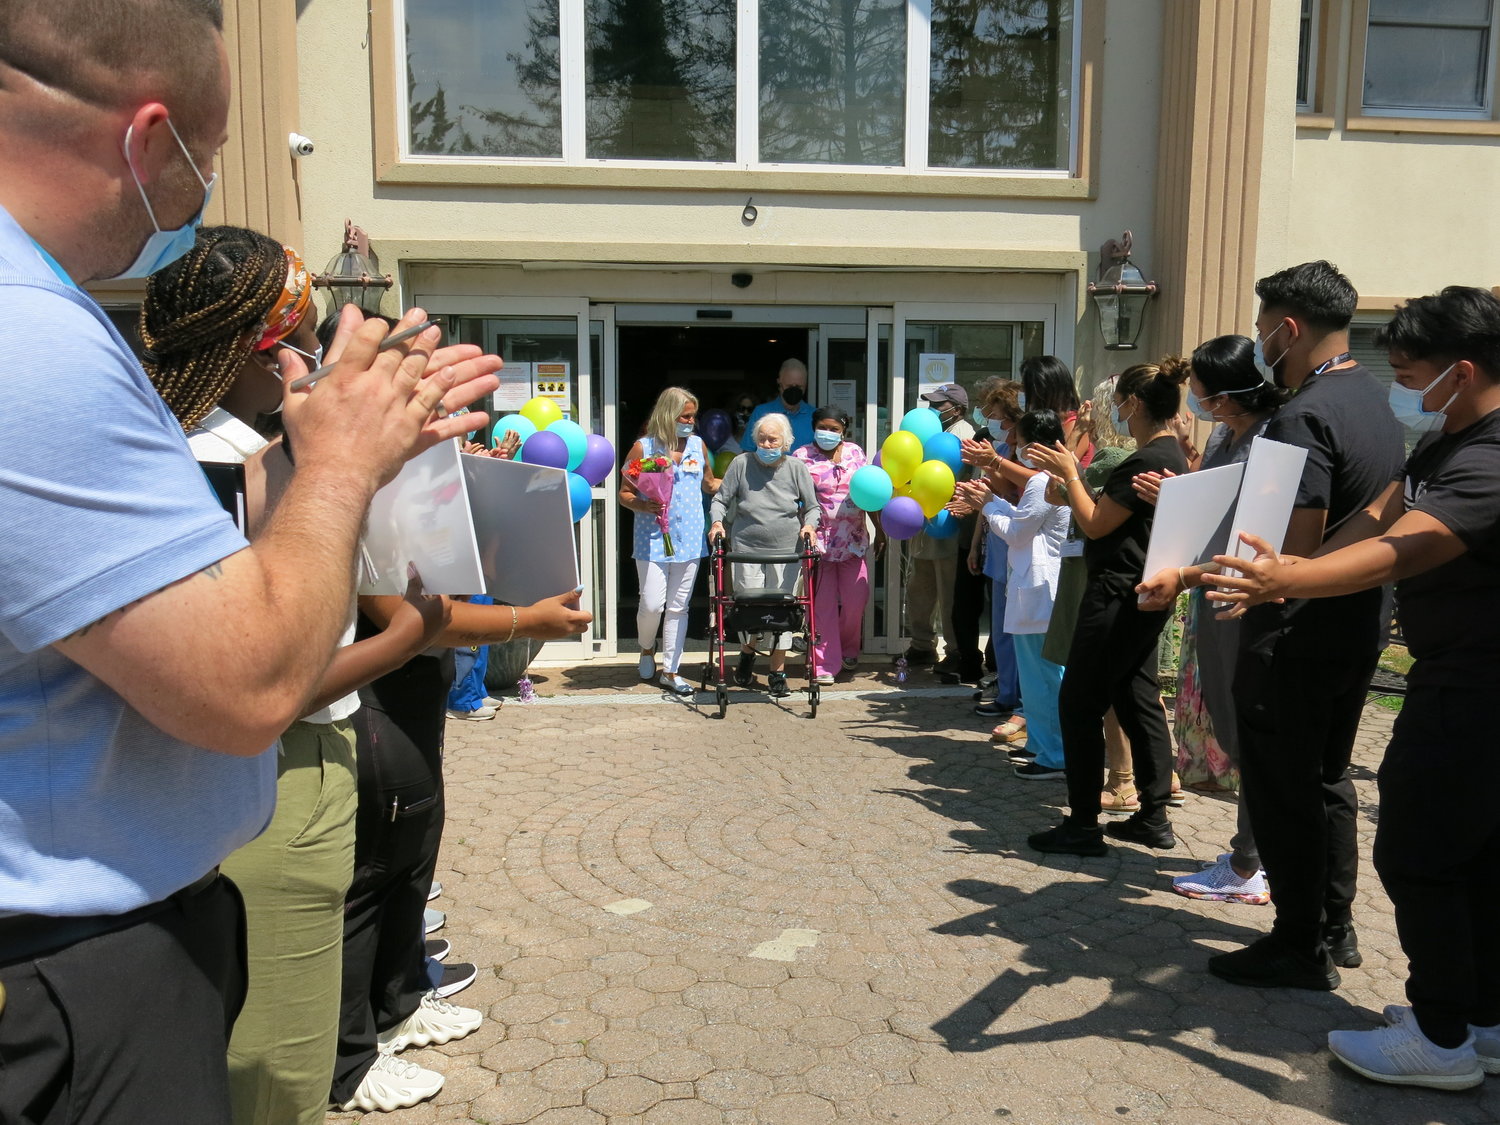 Doctors, therapists and staff lined up to celebrate Nancy Casale, 95, as she left Glen Cove Center for Nursing and Rehabilitation on July 15. She beat Covid and overcame post-Covid symptoms.